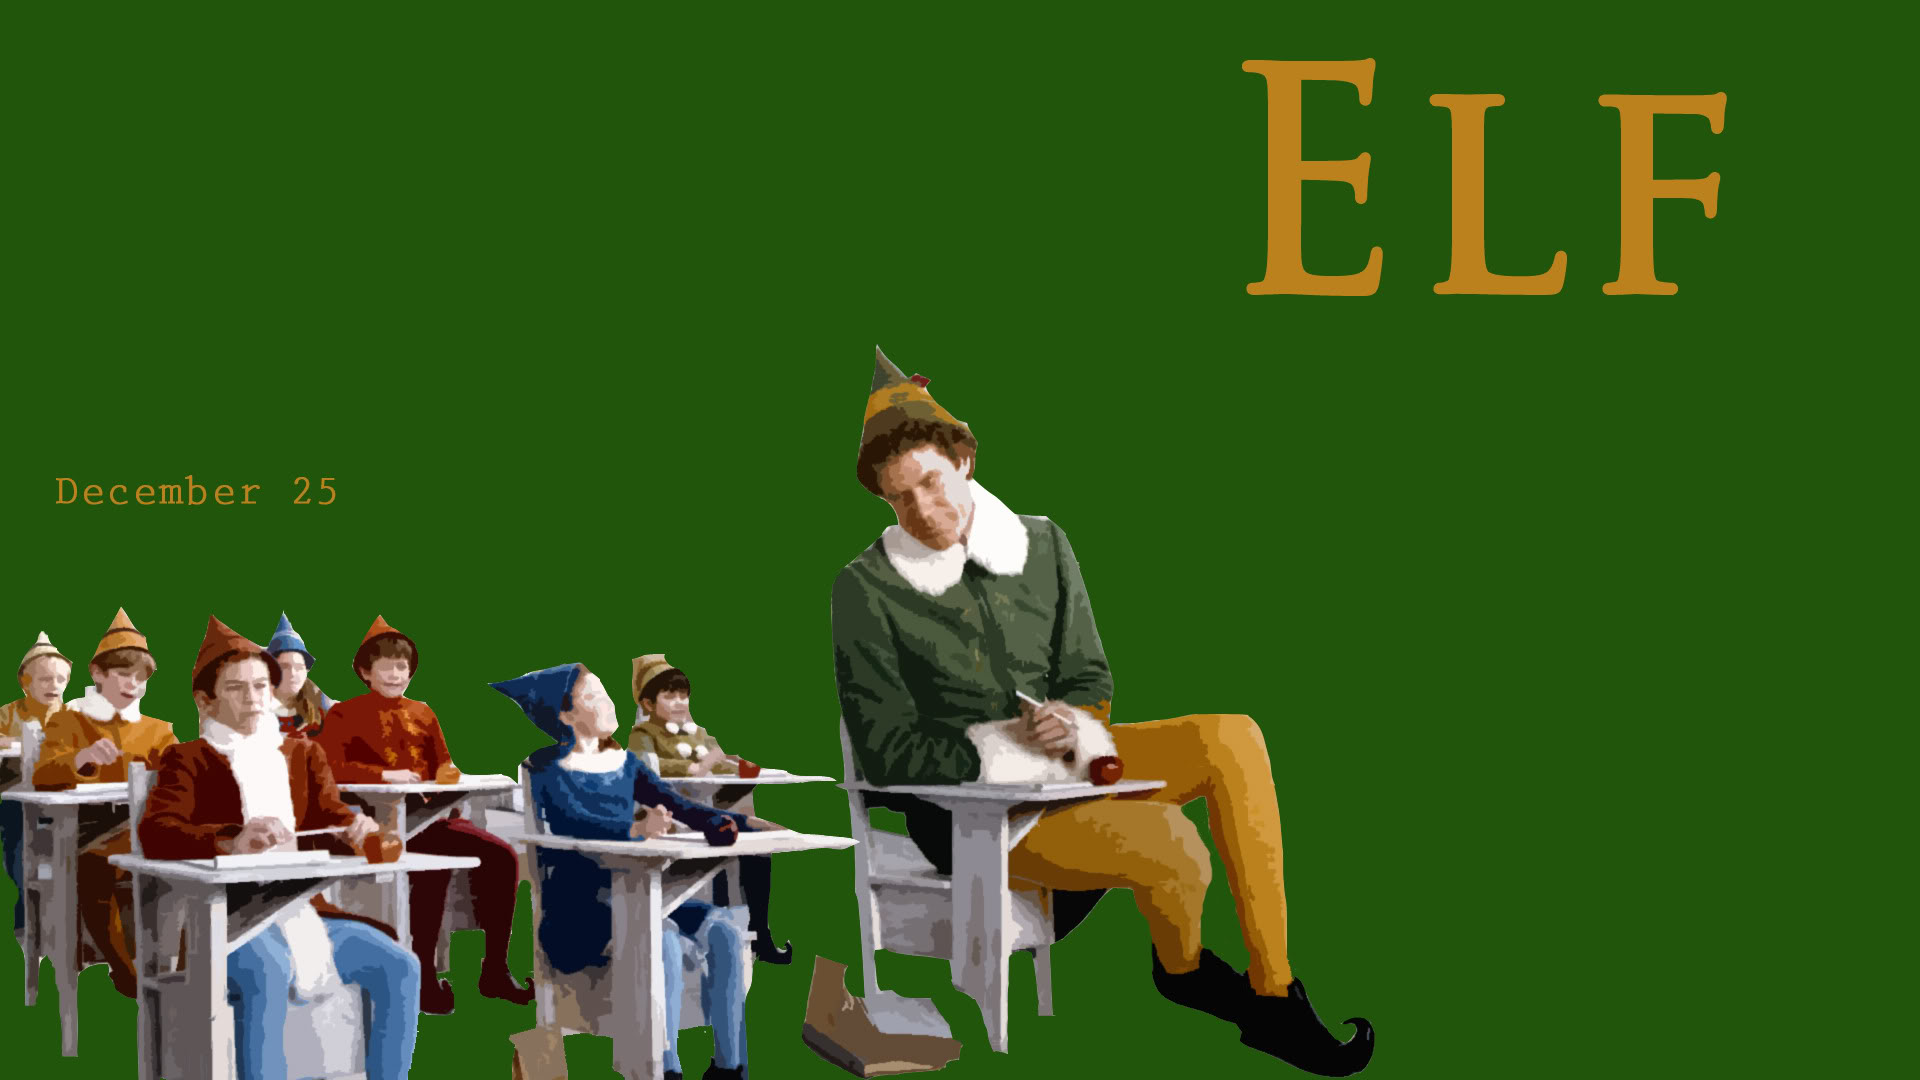 Buddy The Elf Wallpaper 41 images